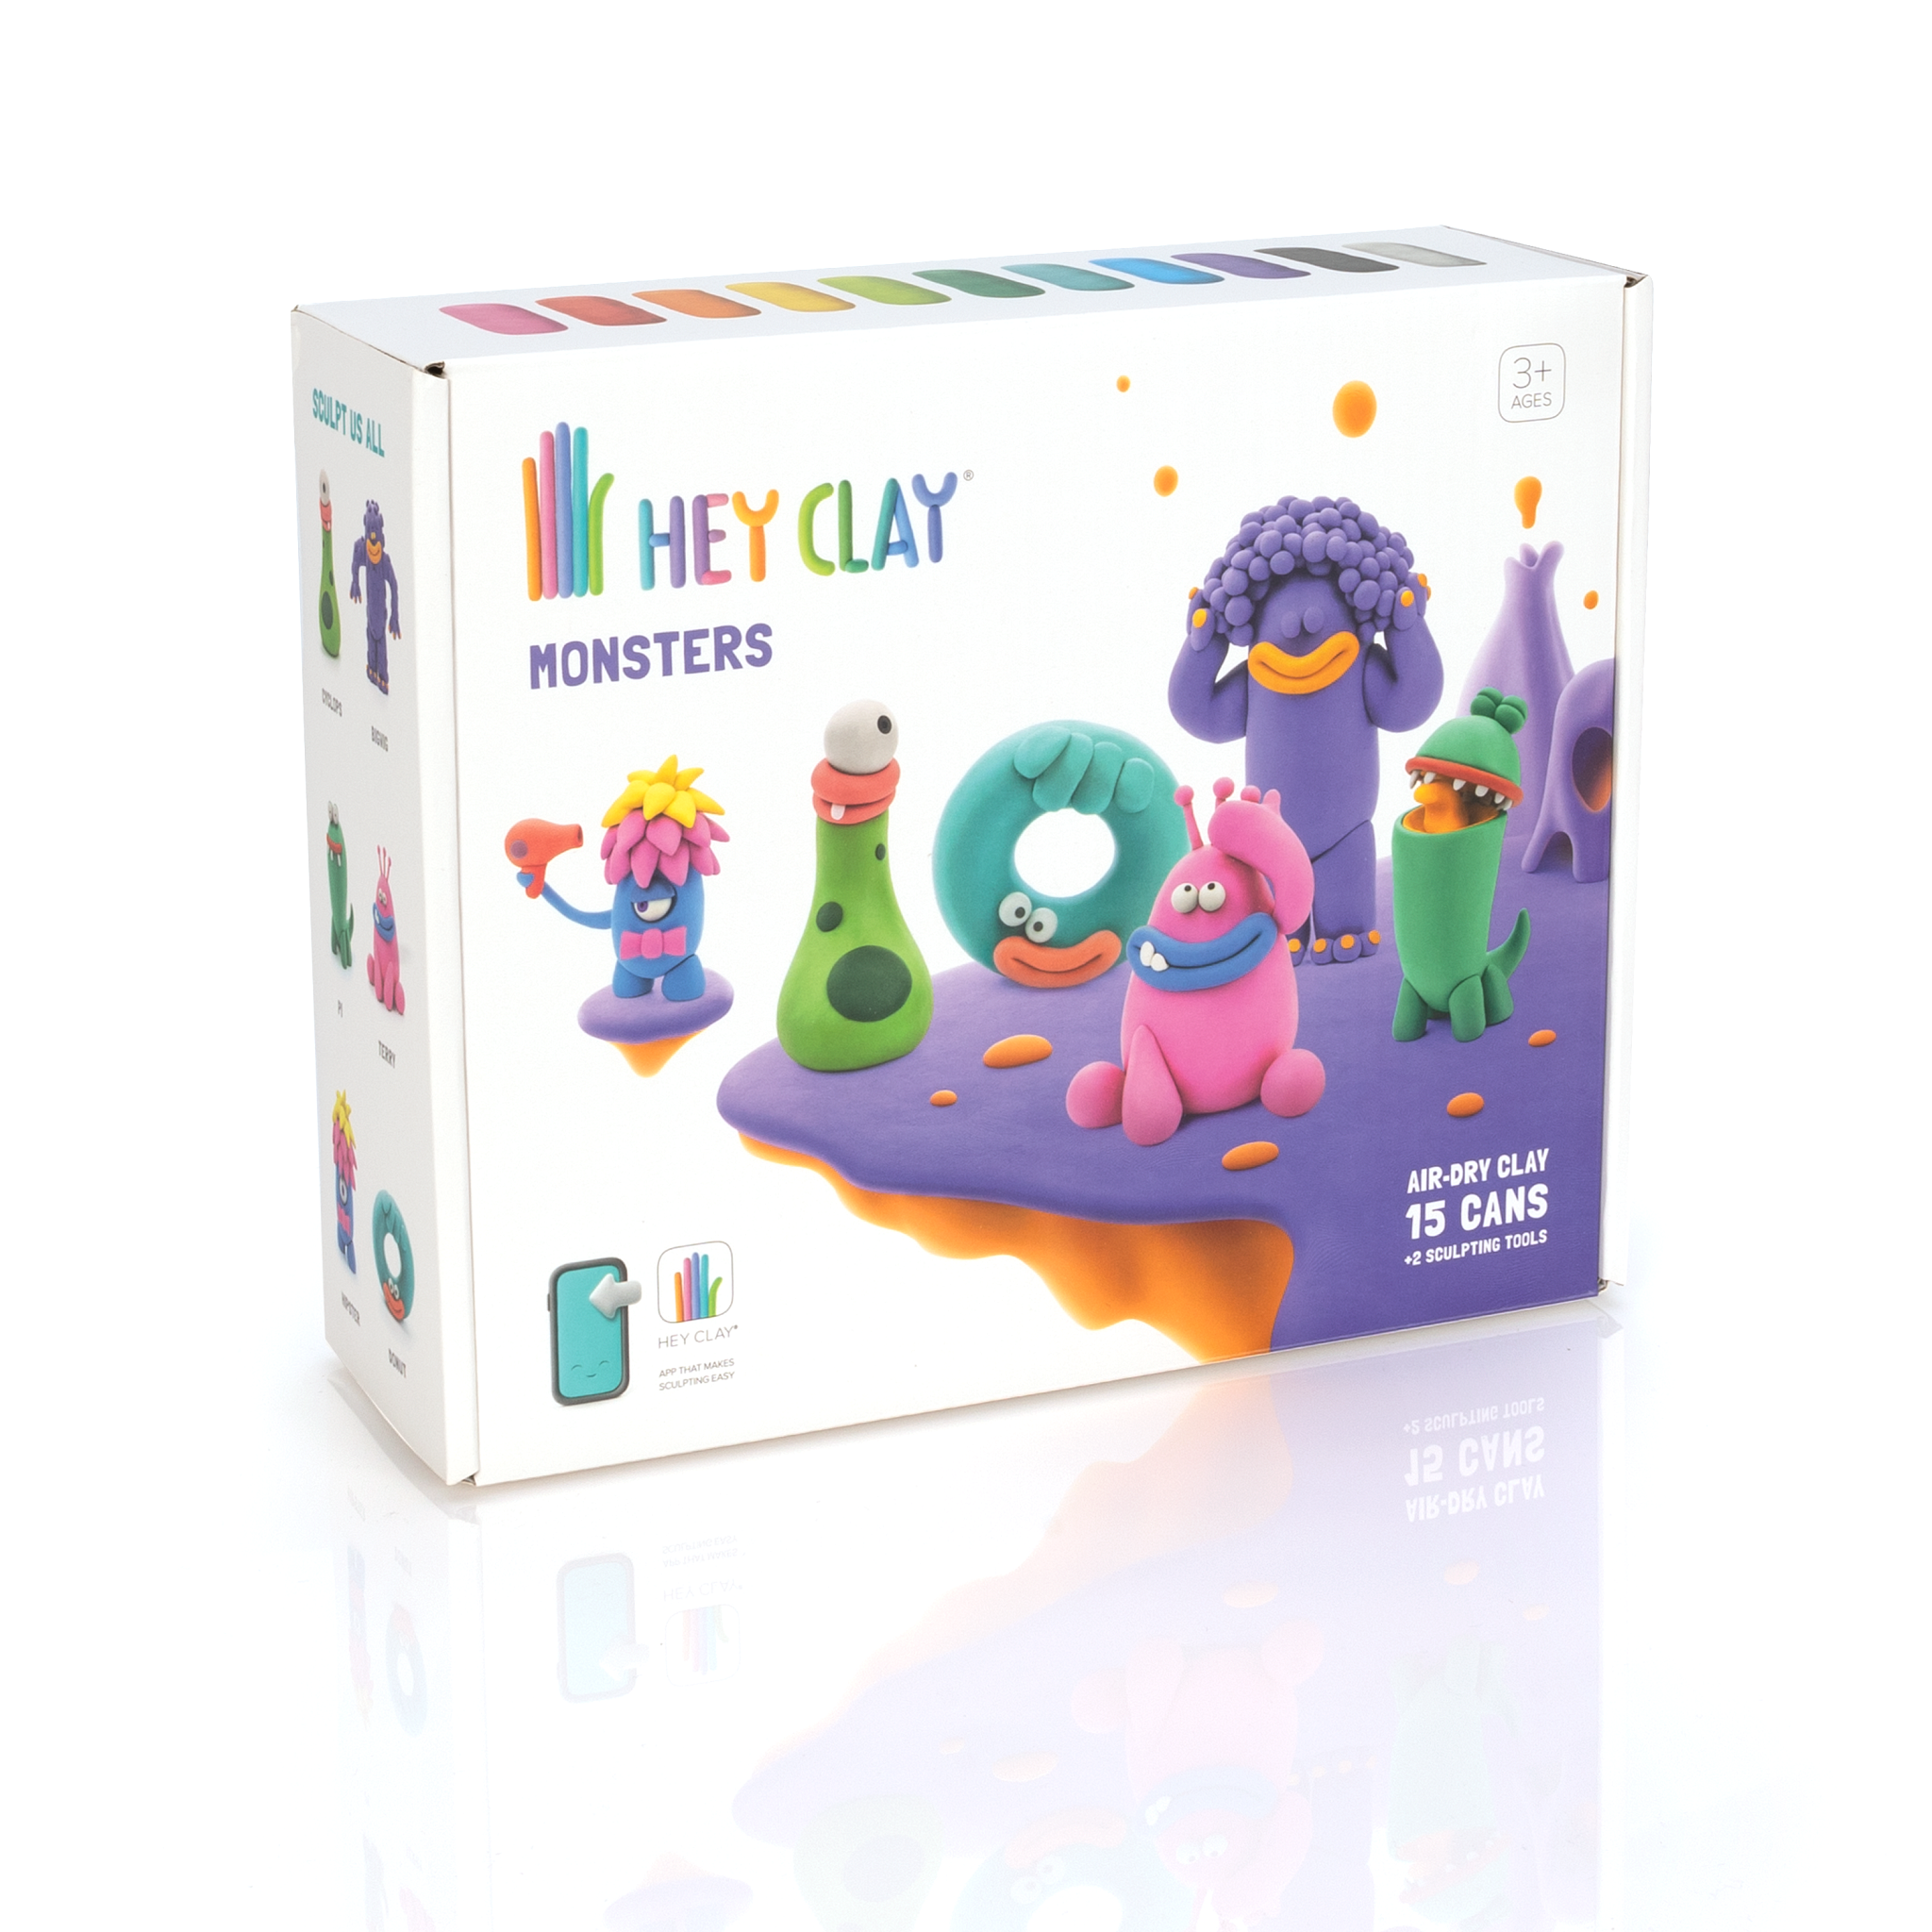 The Baby Dino Bros 12 Color Premium Quality Air Dry Modeling Clay Kit for Kids